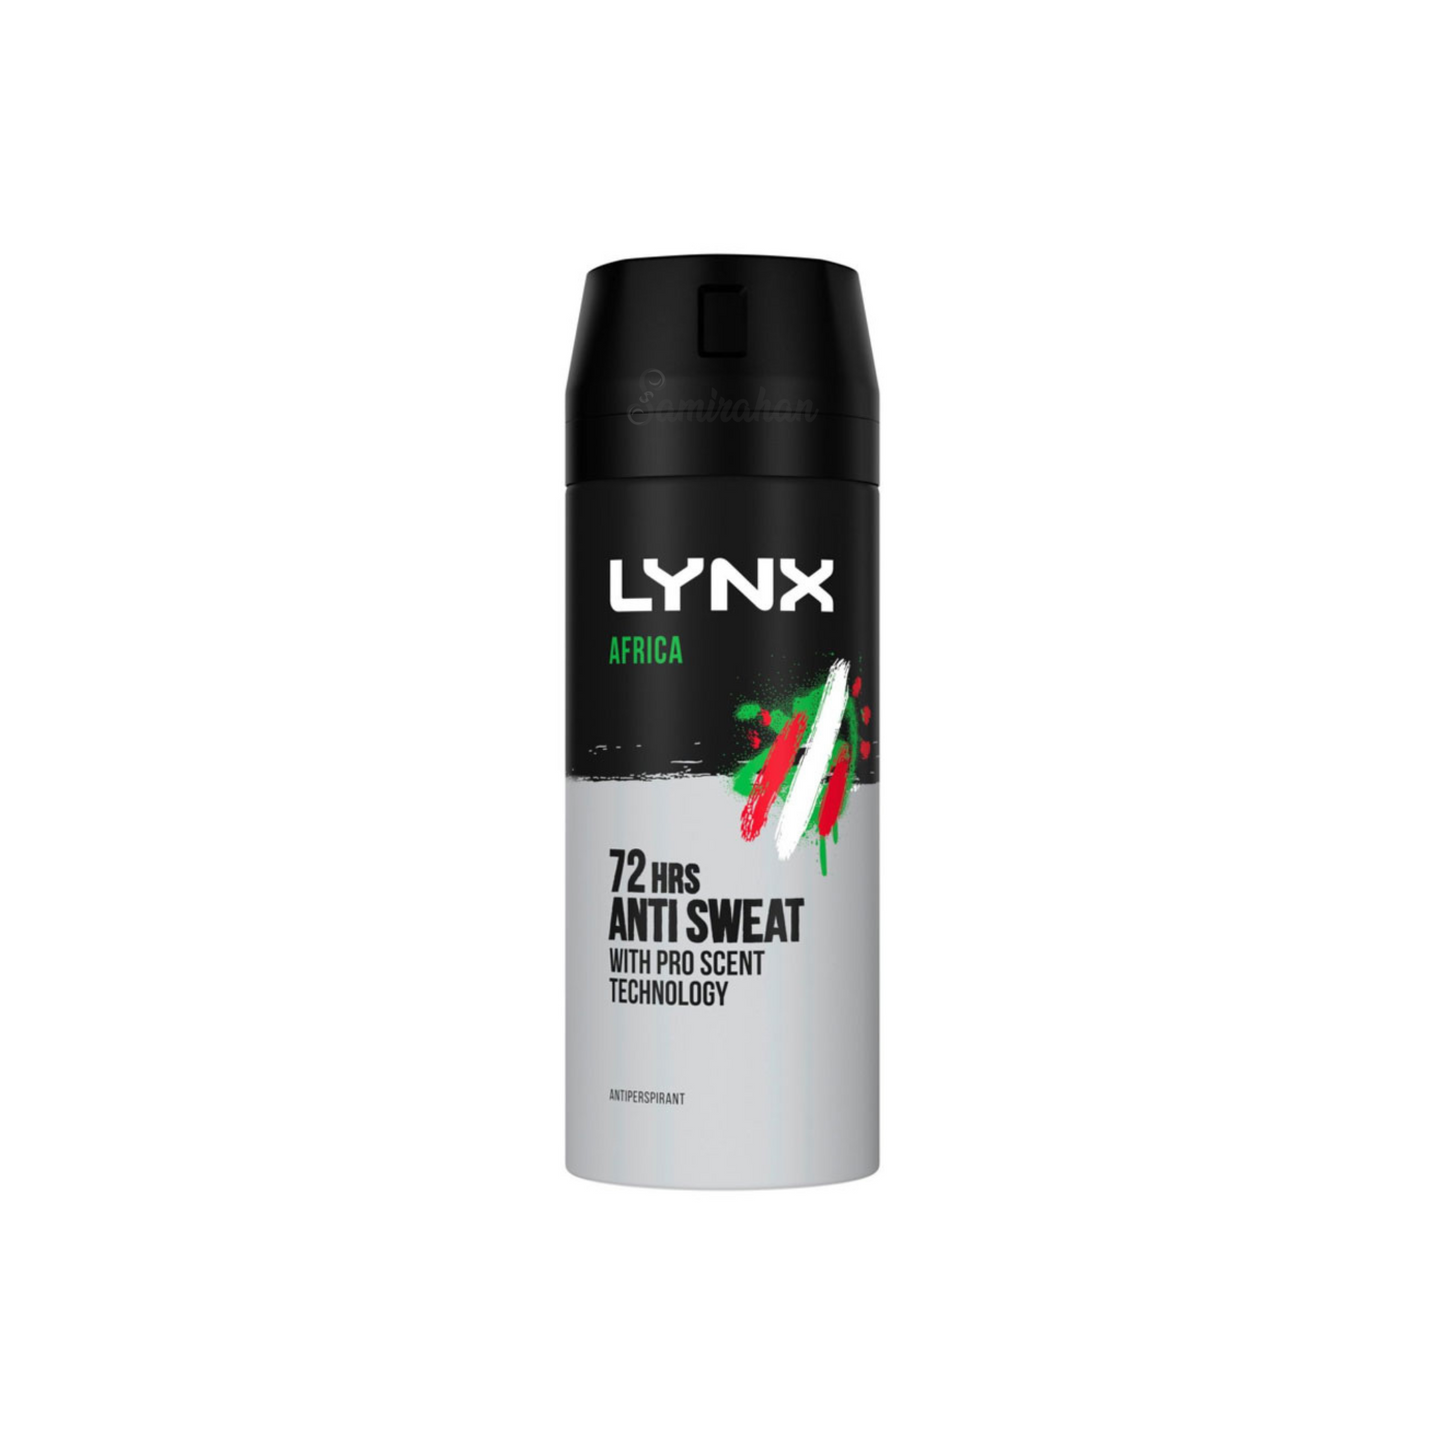 Lynx Africa Anti Sweat with Advanced Antiperspirant is a subtle, refined men’s fragrance. Best imported foreign Australian Aussie anti-perspirant deo premium genuine authentic original real quality nice deodorant boyfriend bf scent perfume men gift idea ideas cheap price in Dhaka Chittagong Sylhet Comilla Bangladesh.